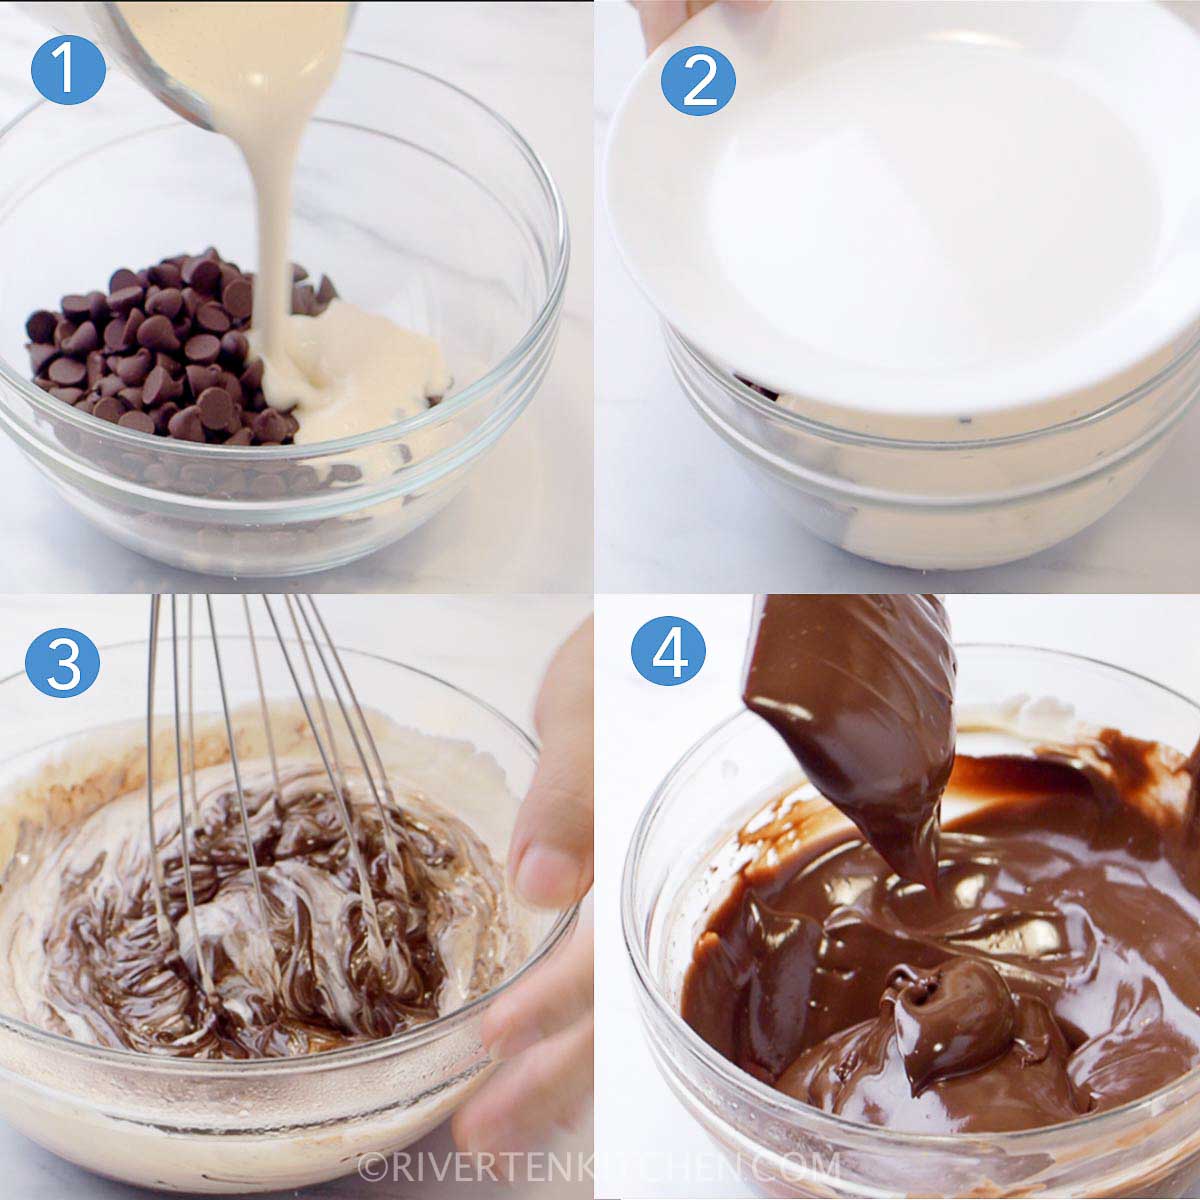 steps on how to make ganache frosting